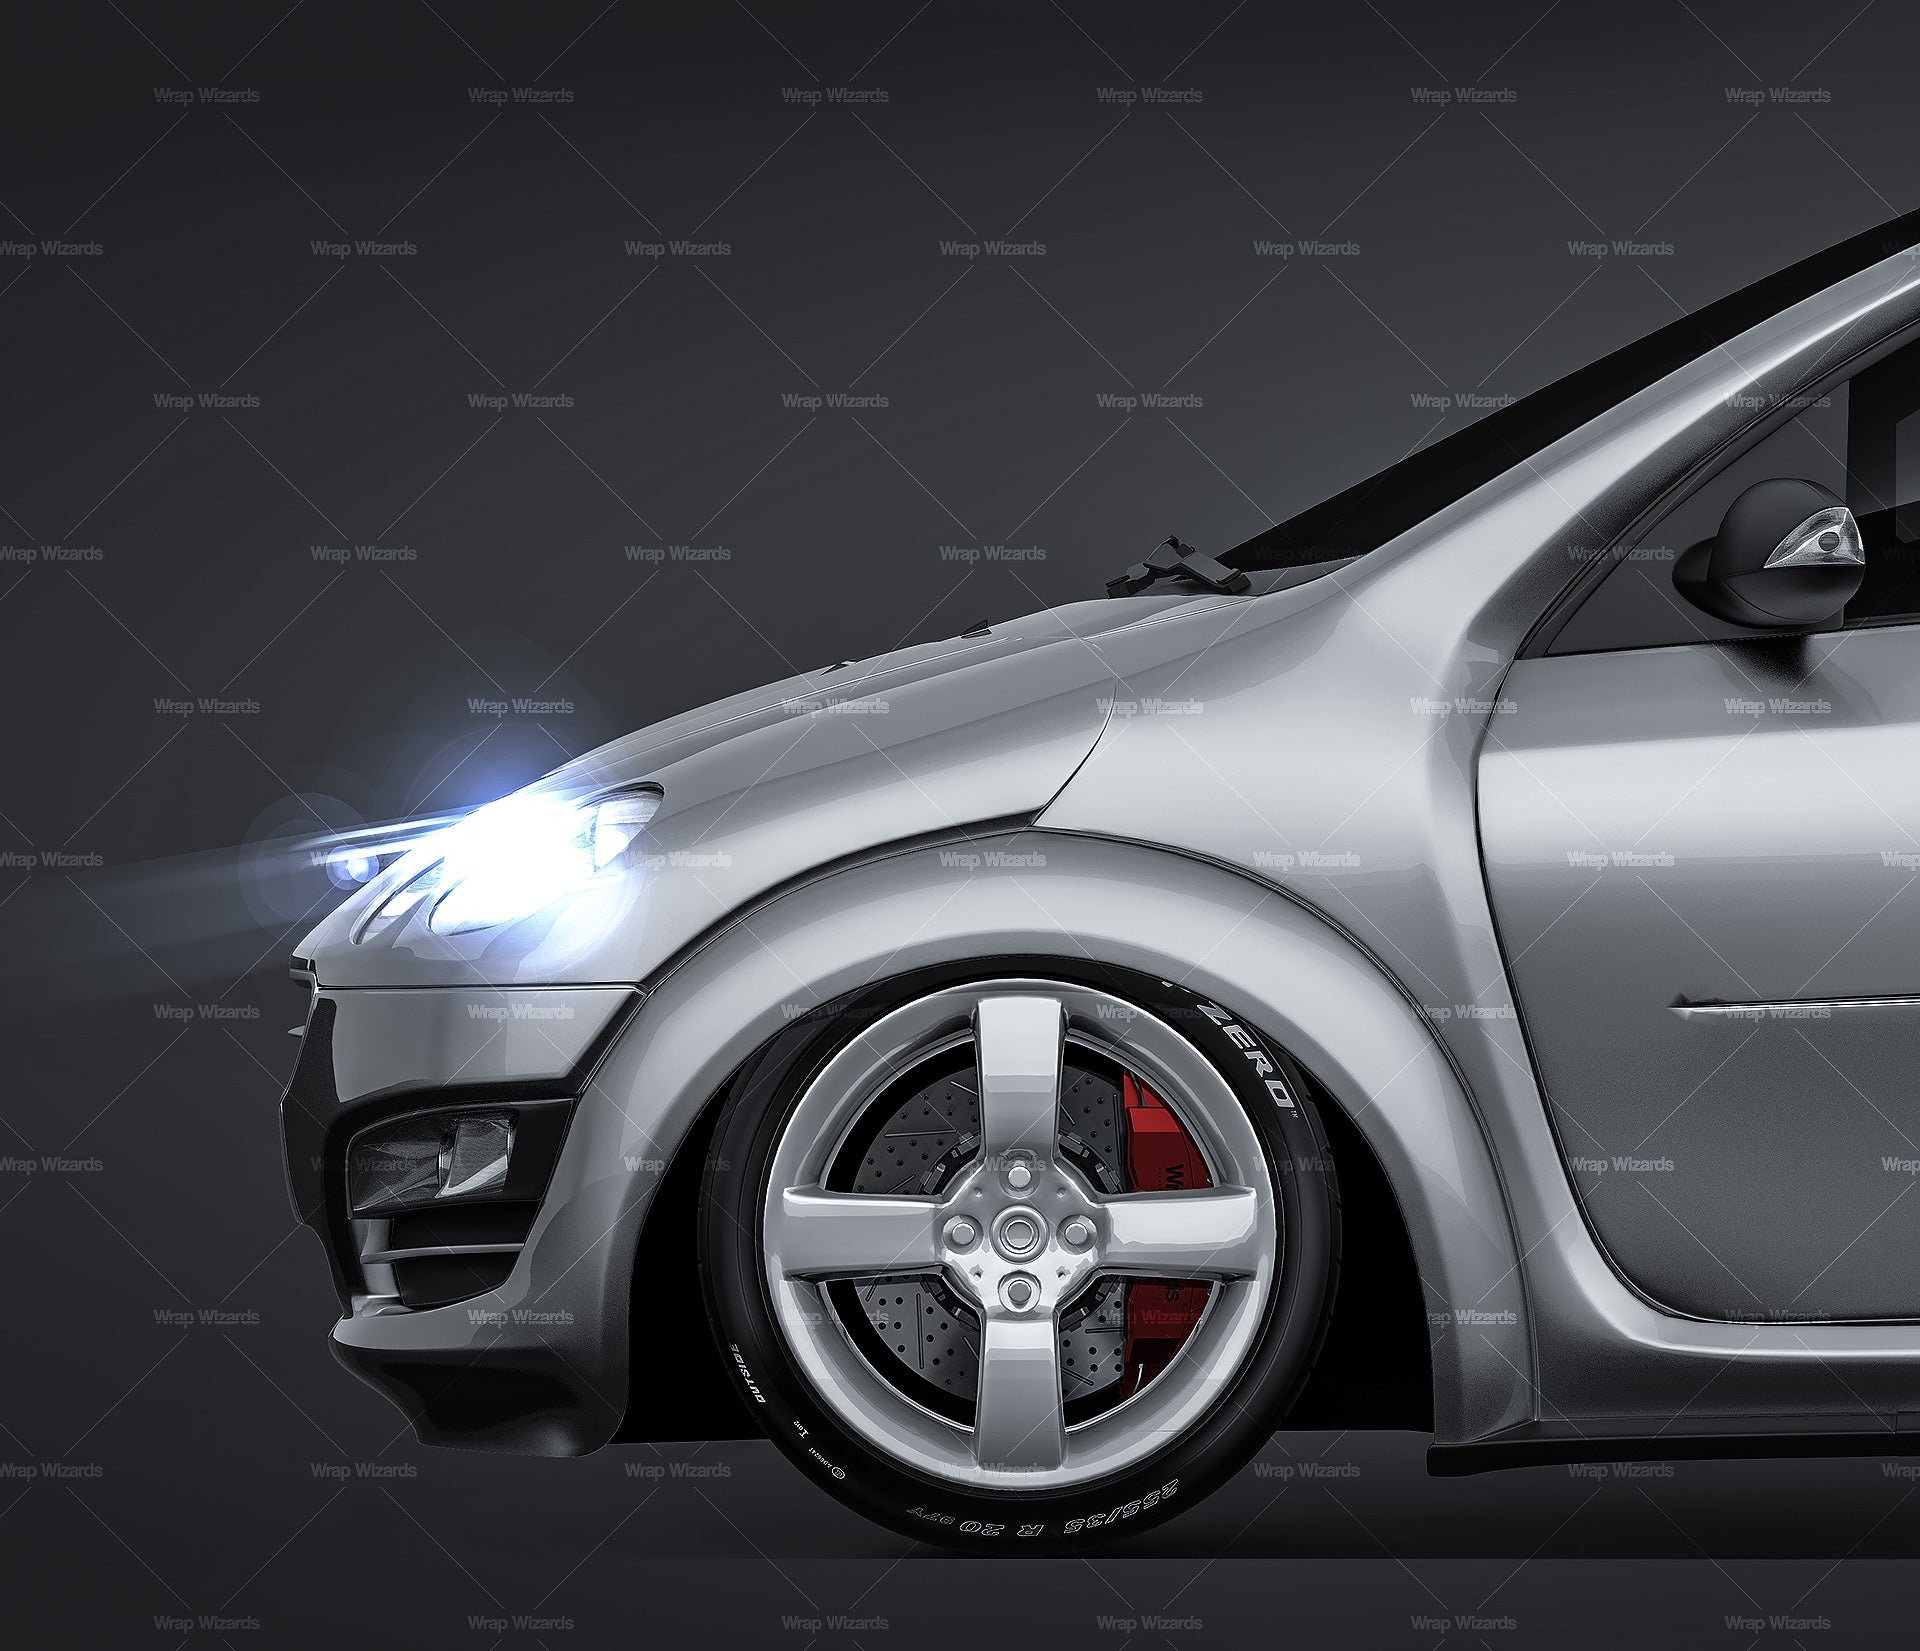 Smart ForFour 2006 glossy finish - all sides Car Mockup Template.psd